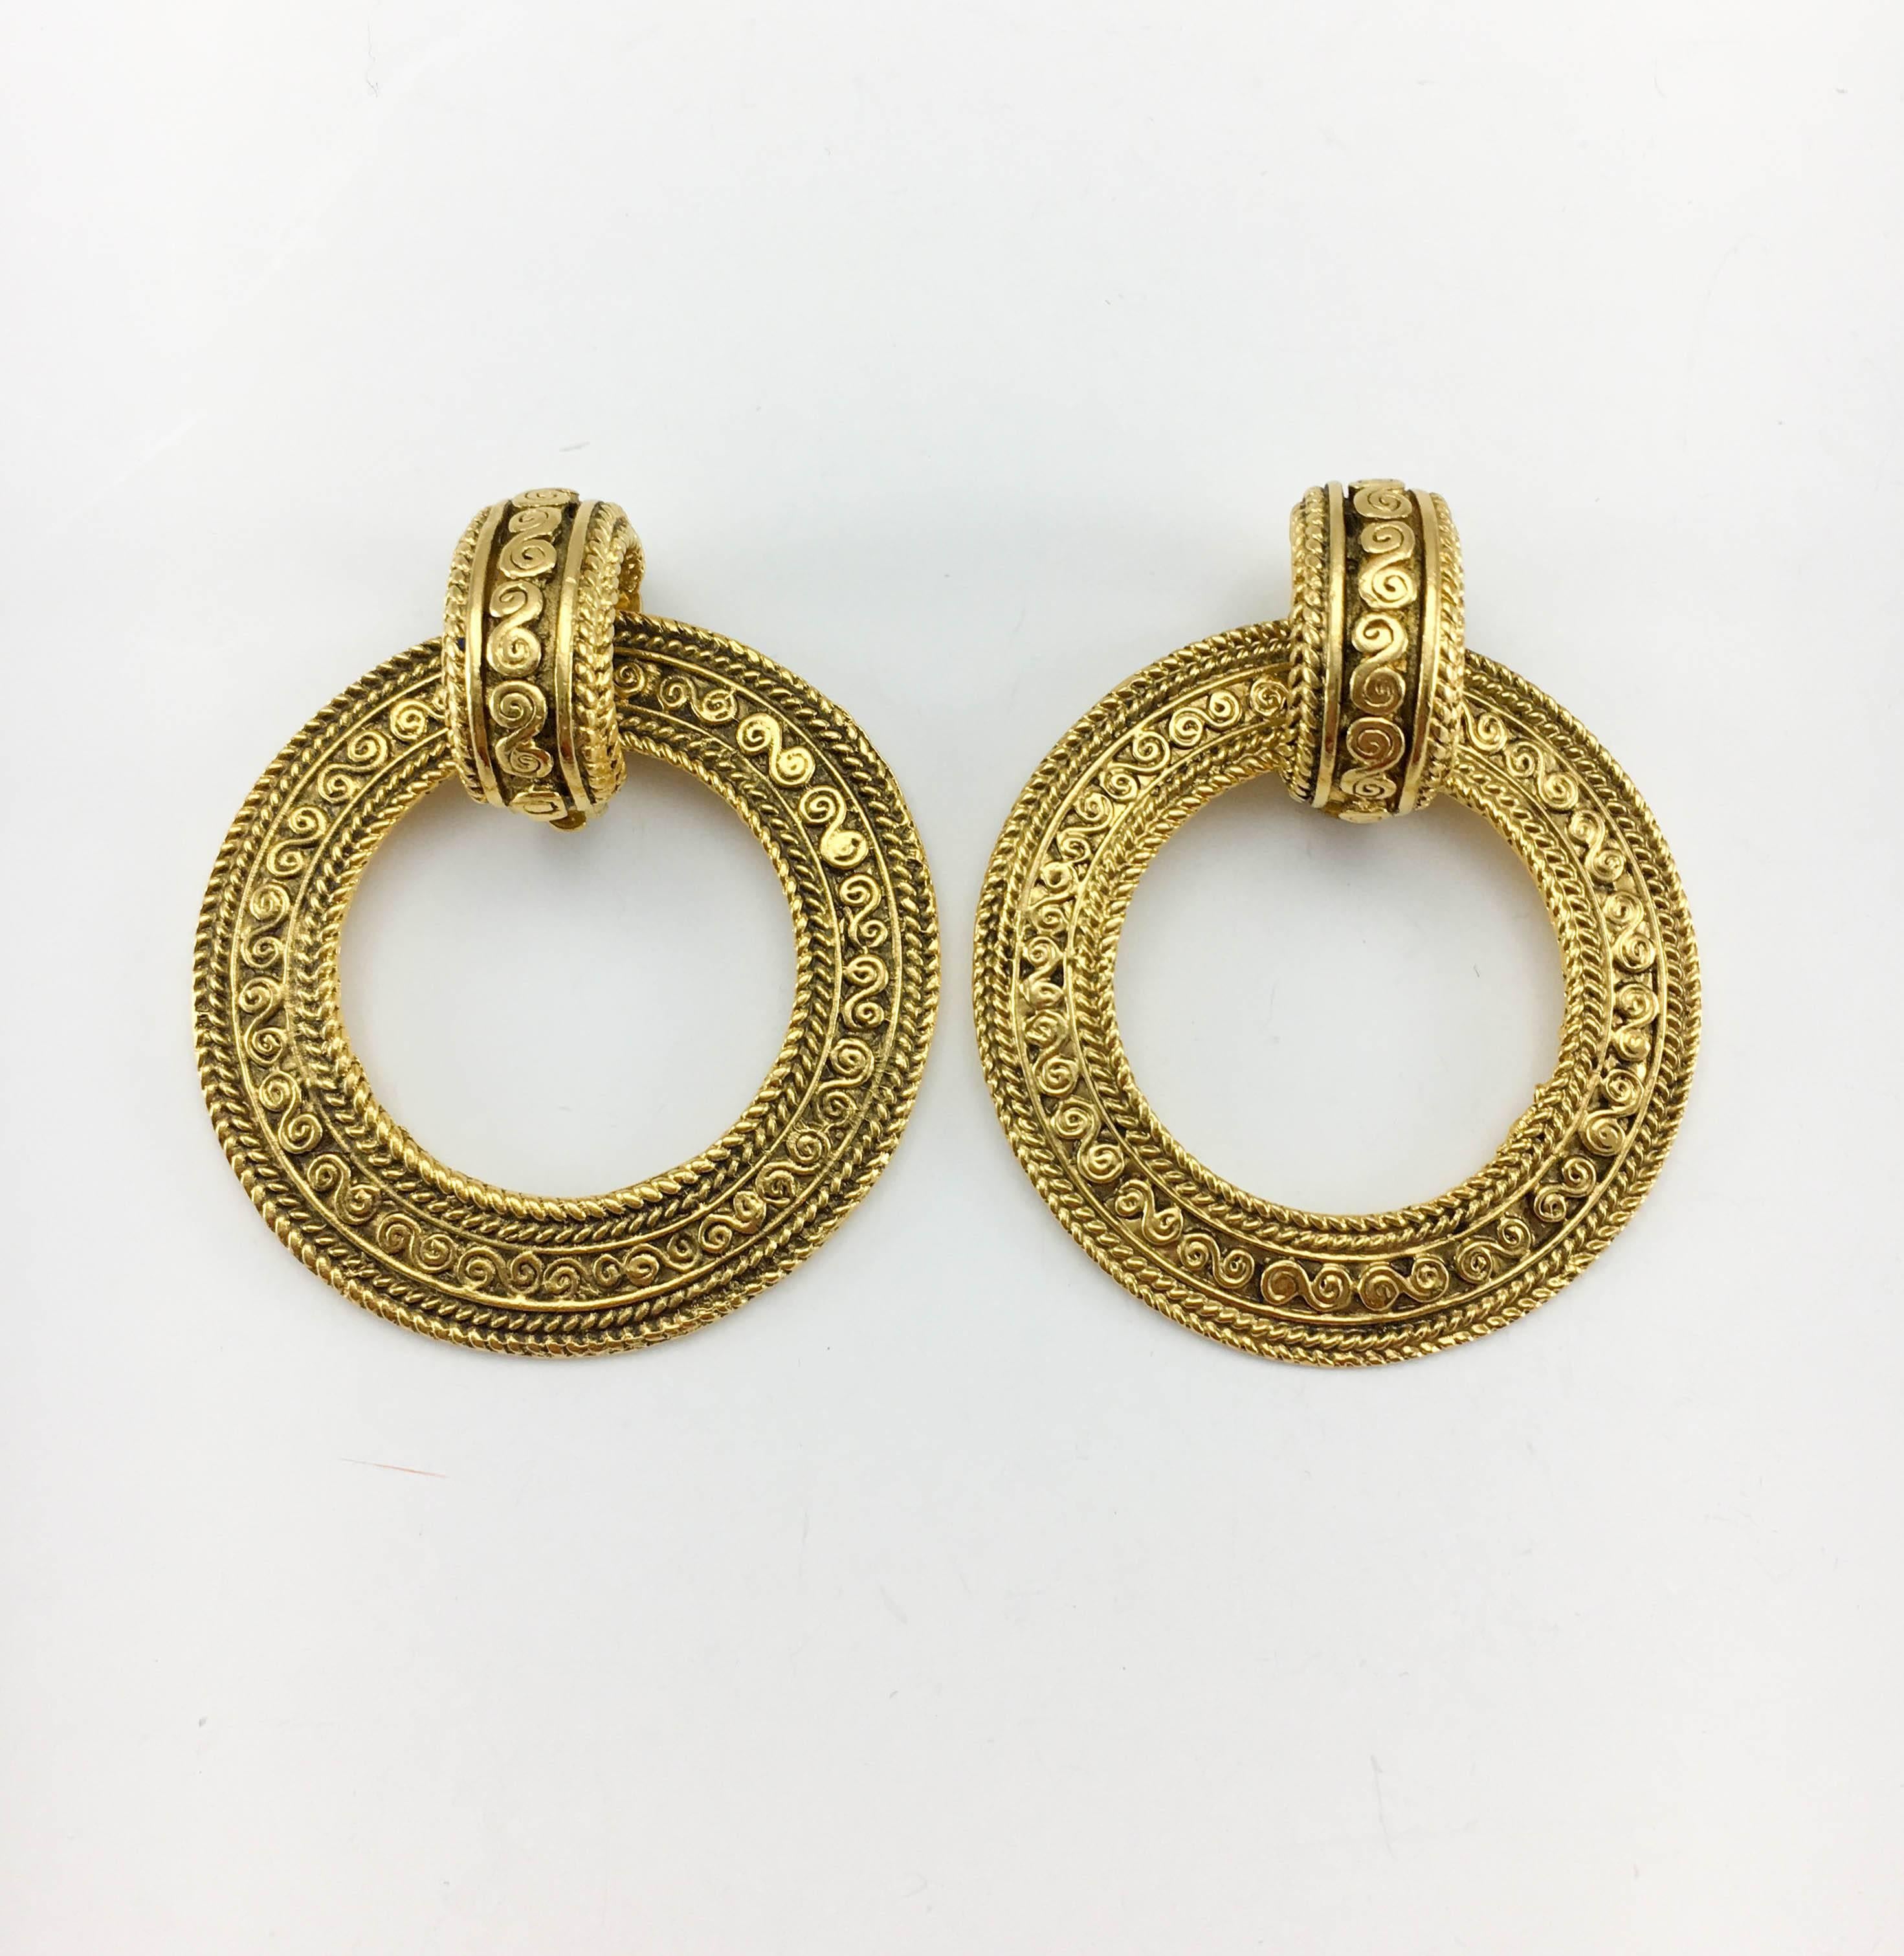 Gorgeous Vintage Chanel Large Hoop Earrings. These amazing earrings by Chanel date back from the 1980’s. Gold-plated, the baroque-inspired design shows intricate details. Versatile, they can be worn as large, statement door-knocker style hoops, or